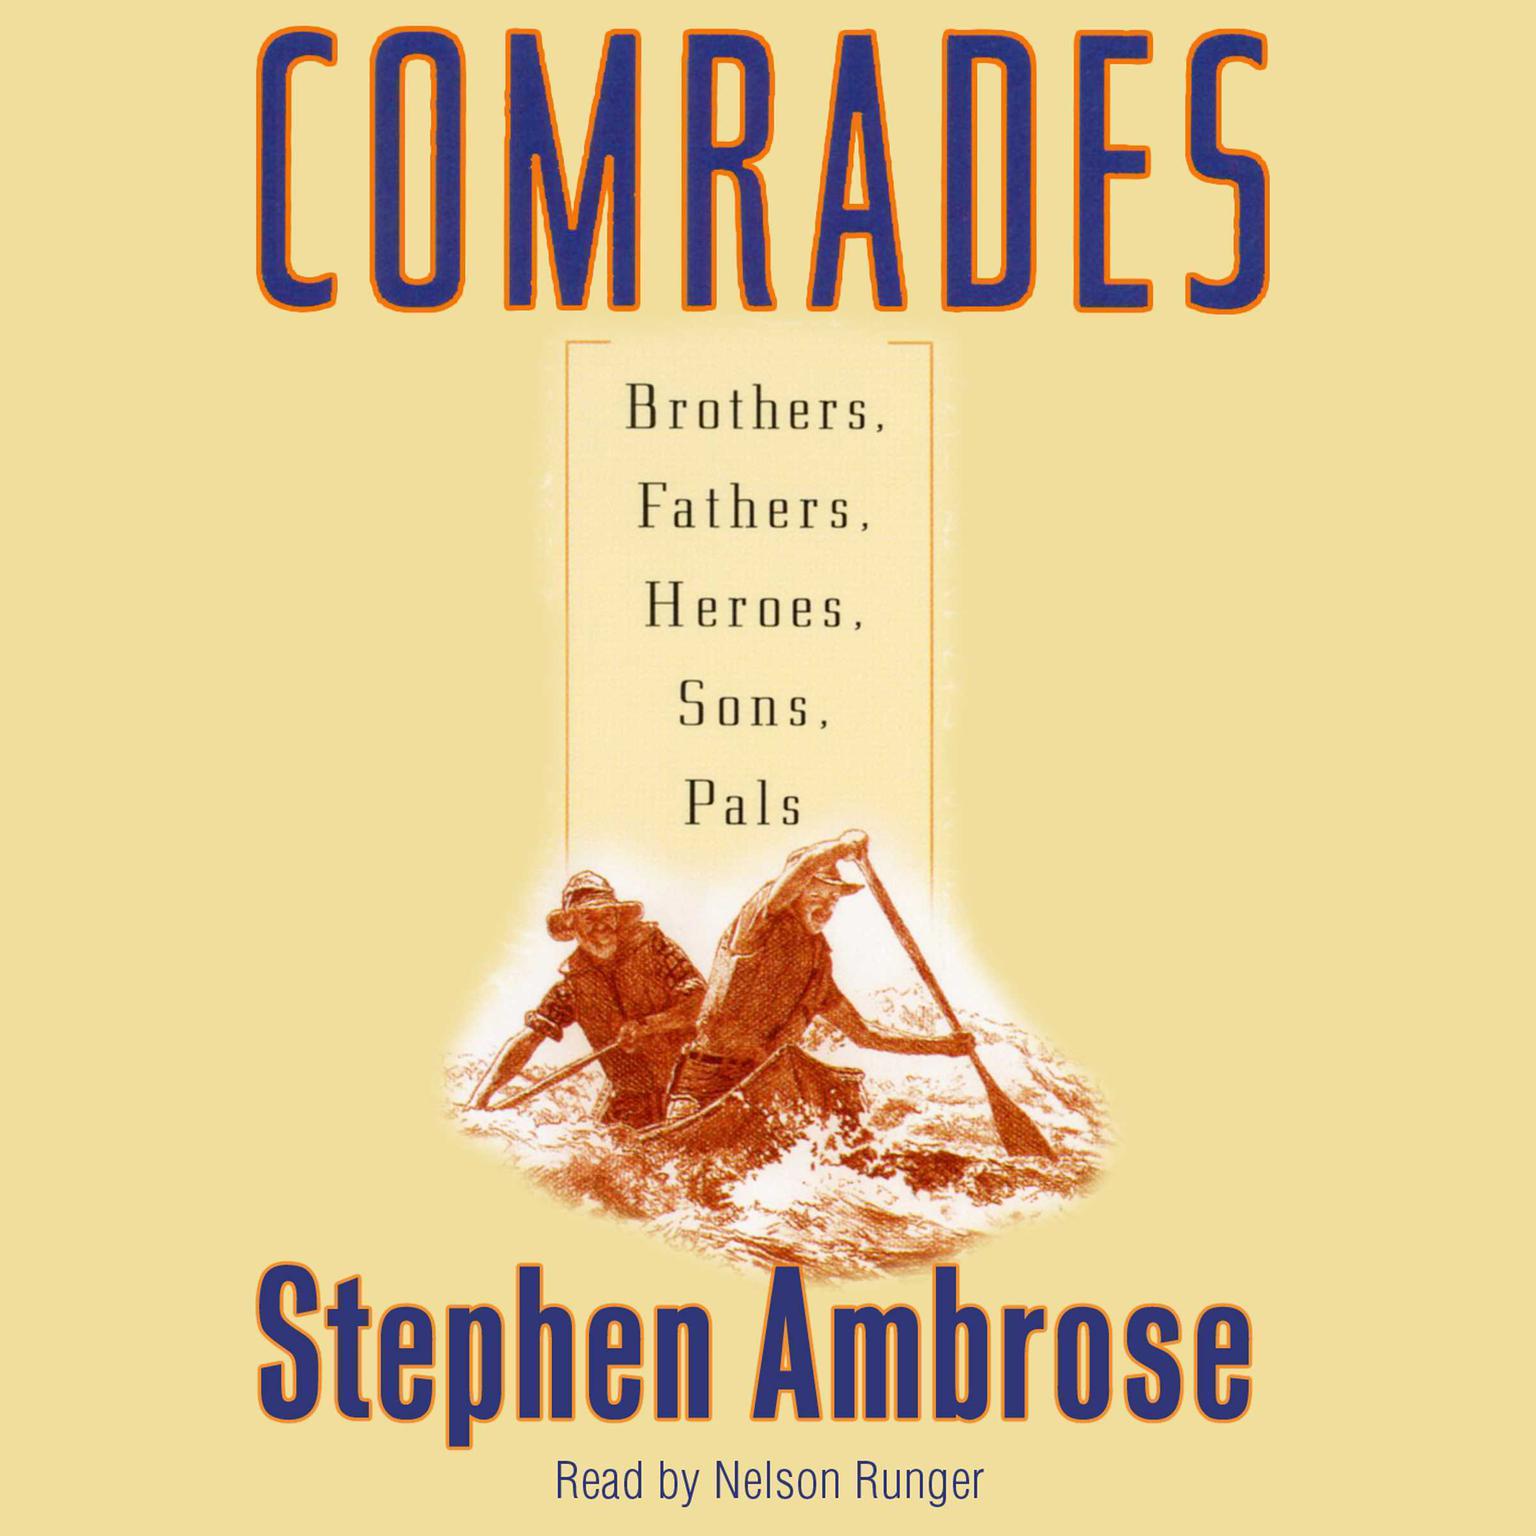 Comrades (Abridged): Brothers, Fathers, Sons, Pals Audiobook, by Stephen E. Ambrose